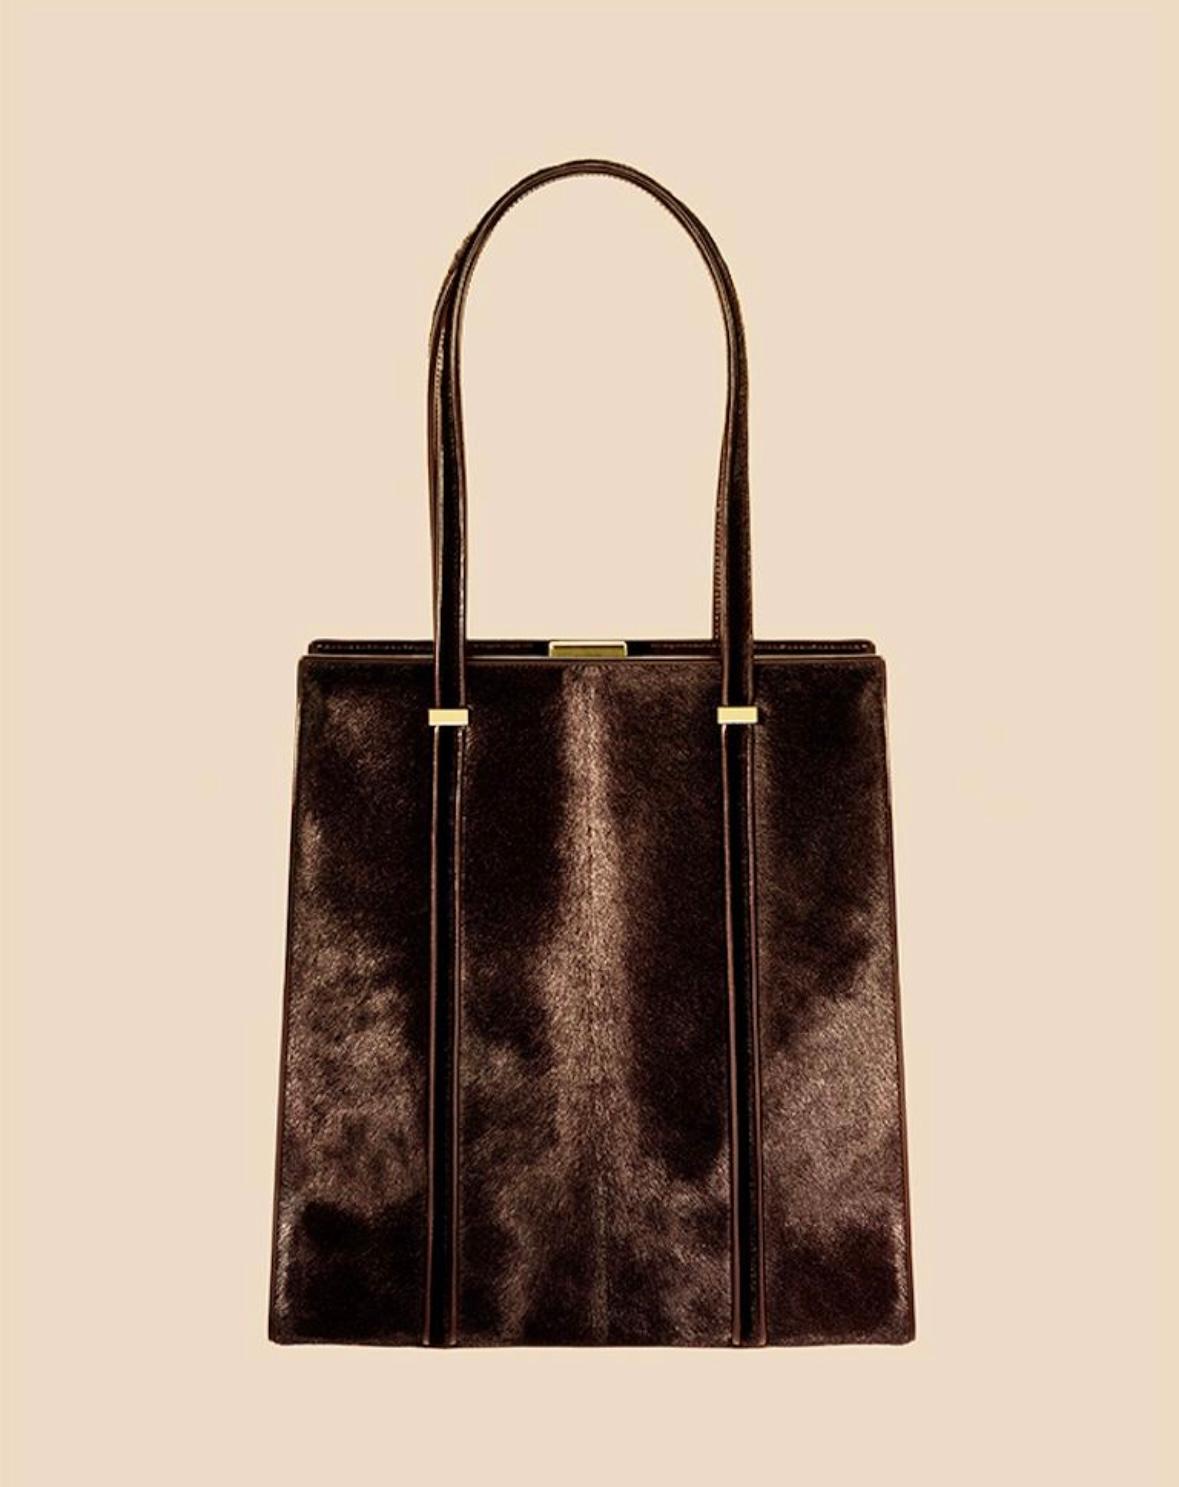 This truly incredible black crocodile Gucci top handle bag was designed by Tom Ford for the Fall/Winter 1996 collection with the pony hair version highlighted in the season's ad campaign. Constructed entirely of black crocodile, this bag features a